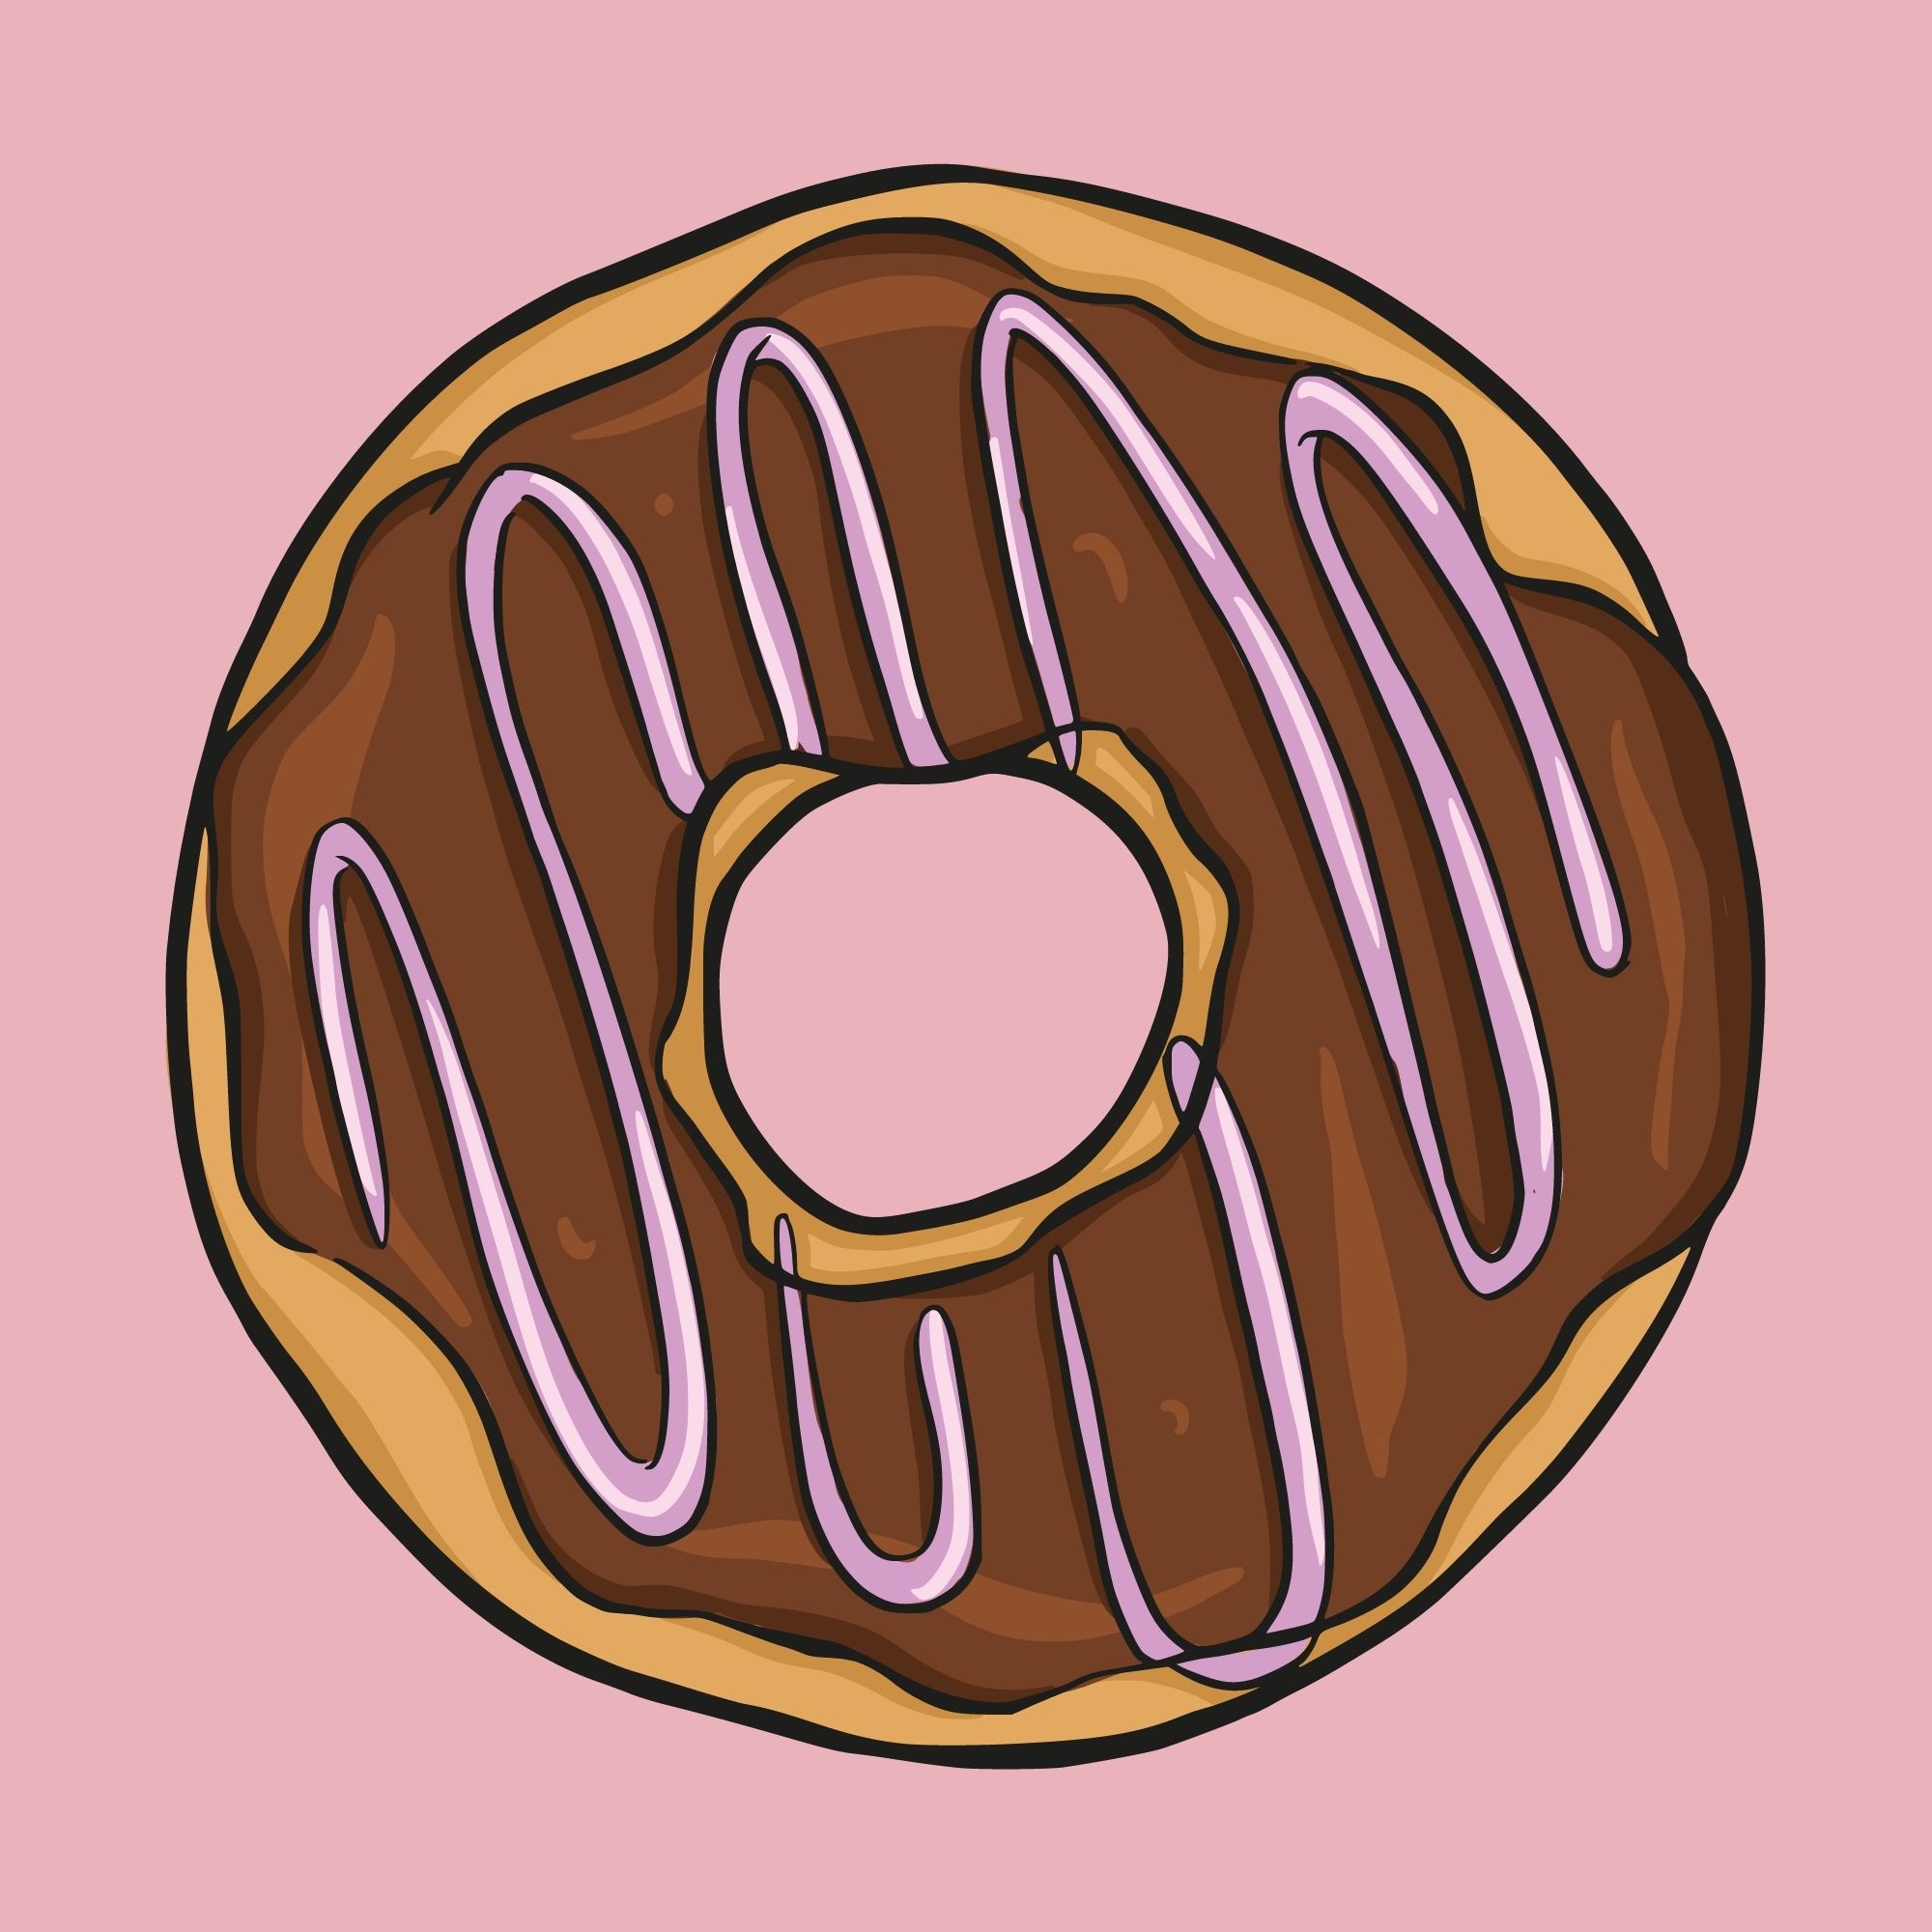 Donut #37 - Poly Donuts